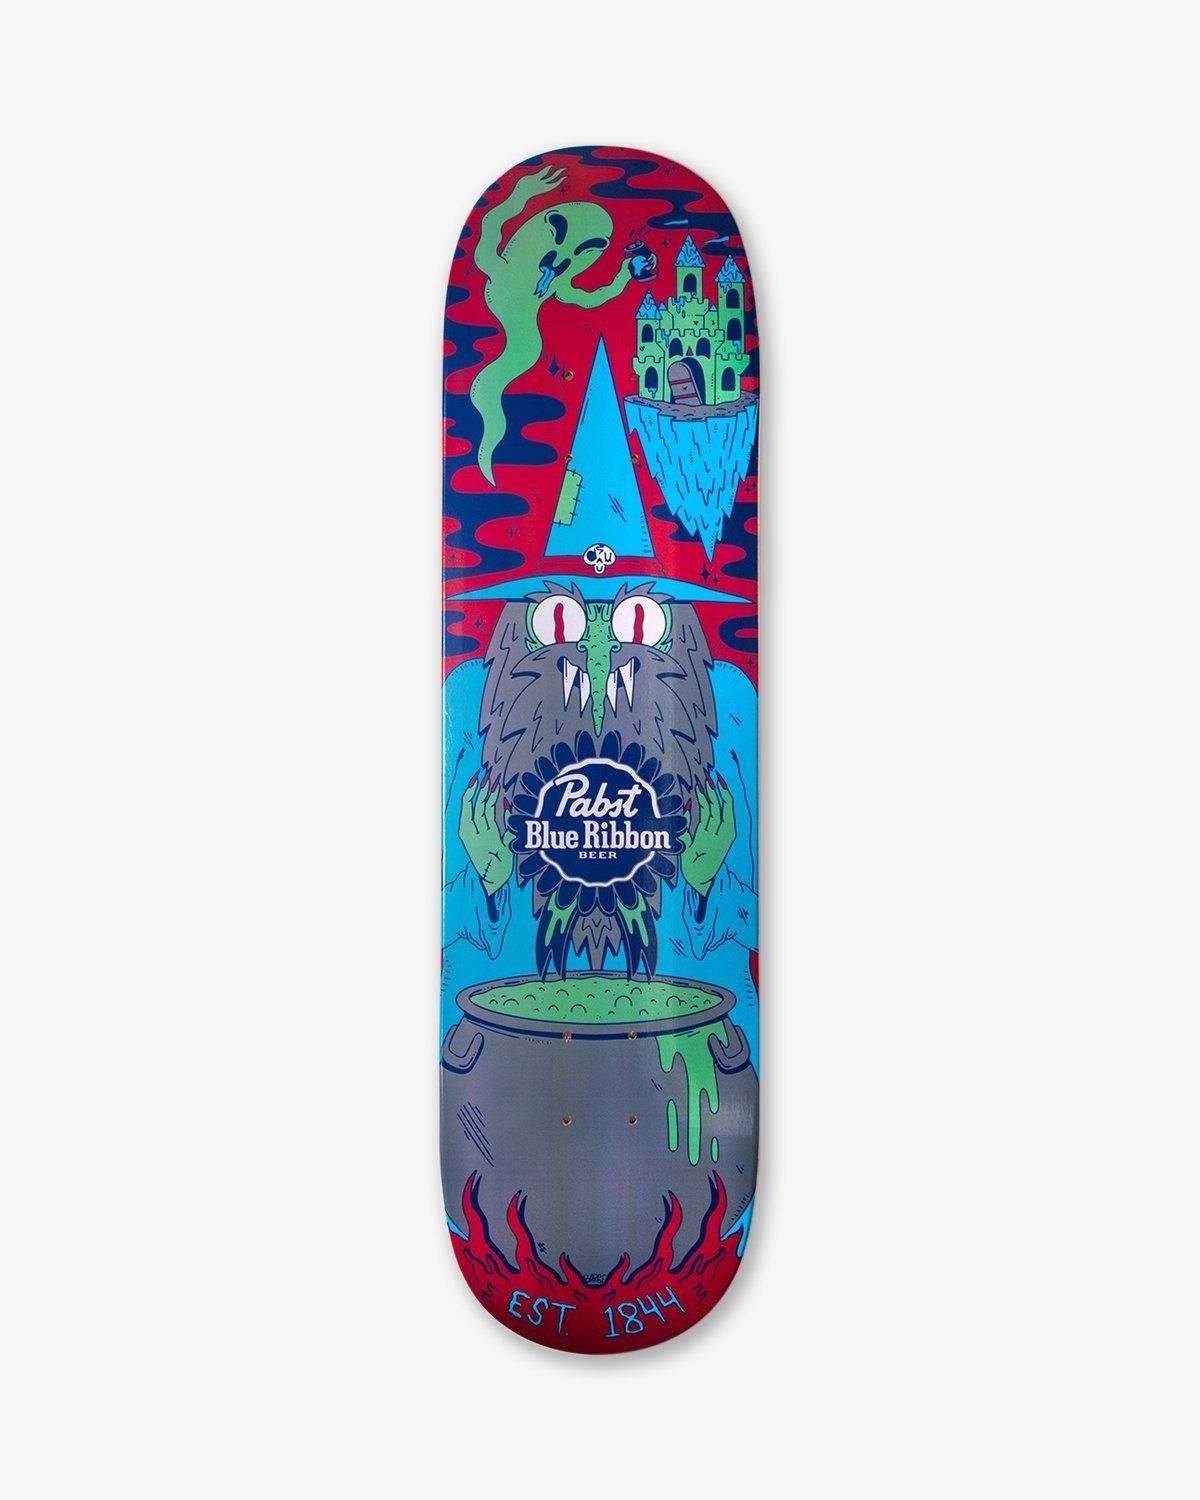 Ride With The Wizard Skateboard By Dakota Cates For Pabst Blue Ribbon 1